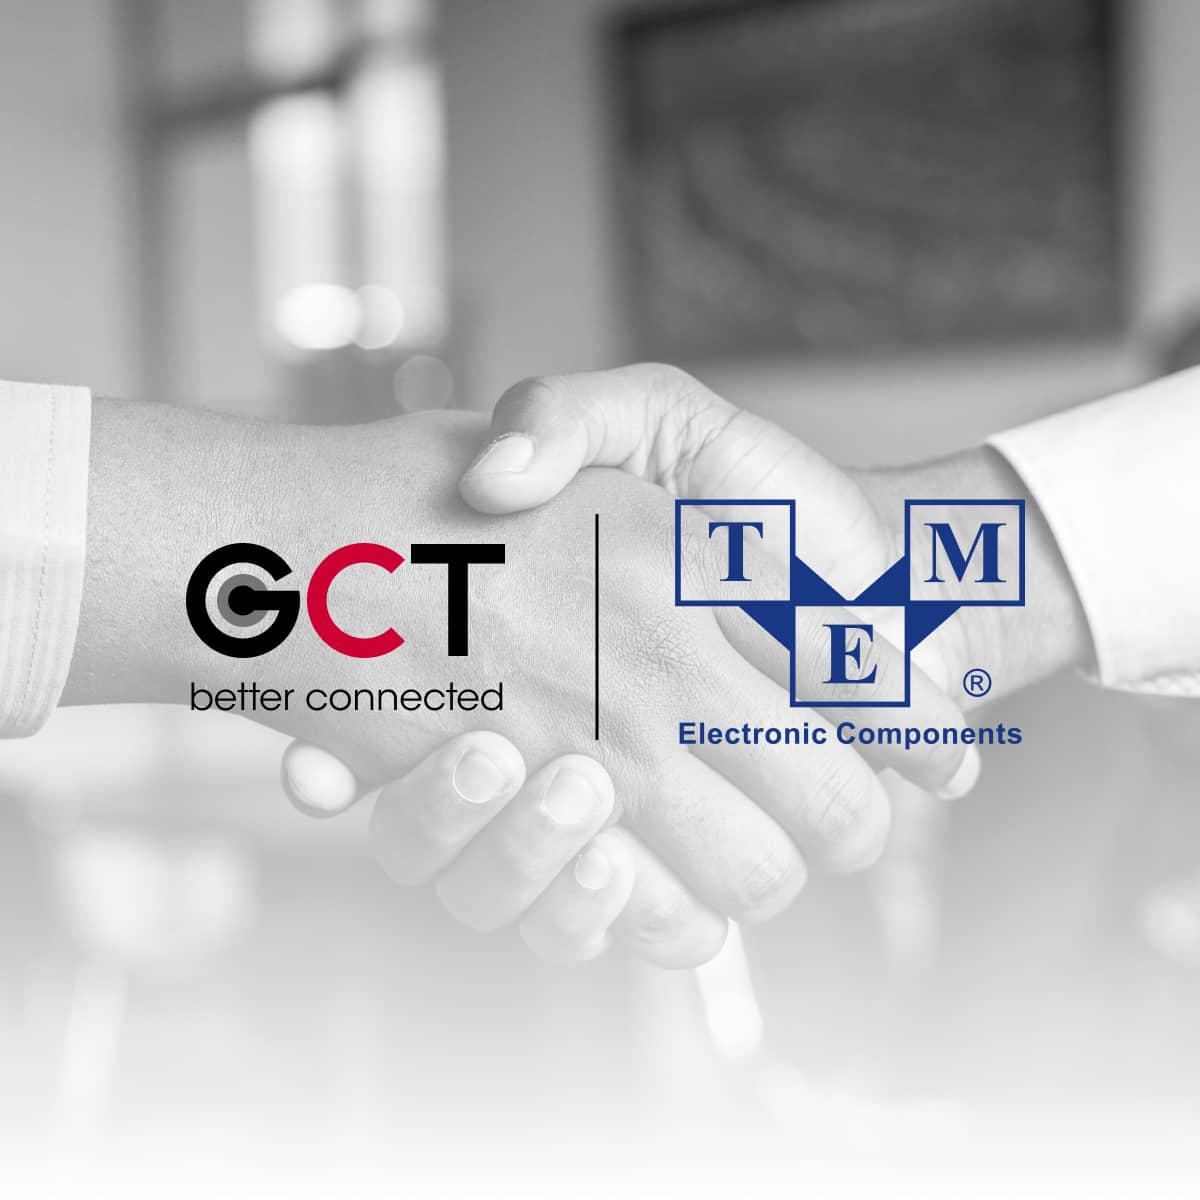 GCT expands its North American distribution coverage with TME